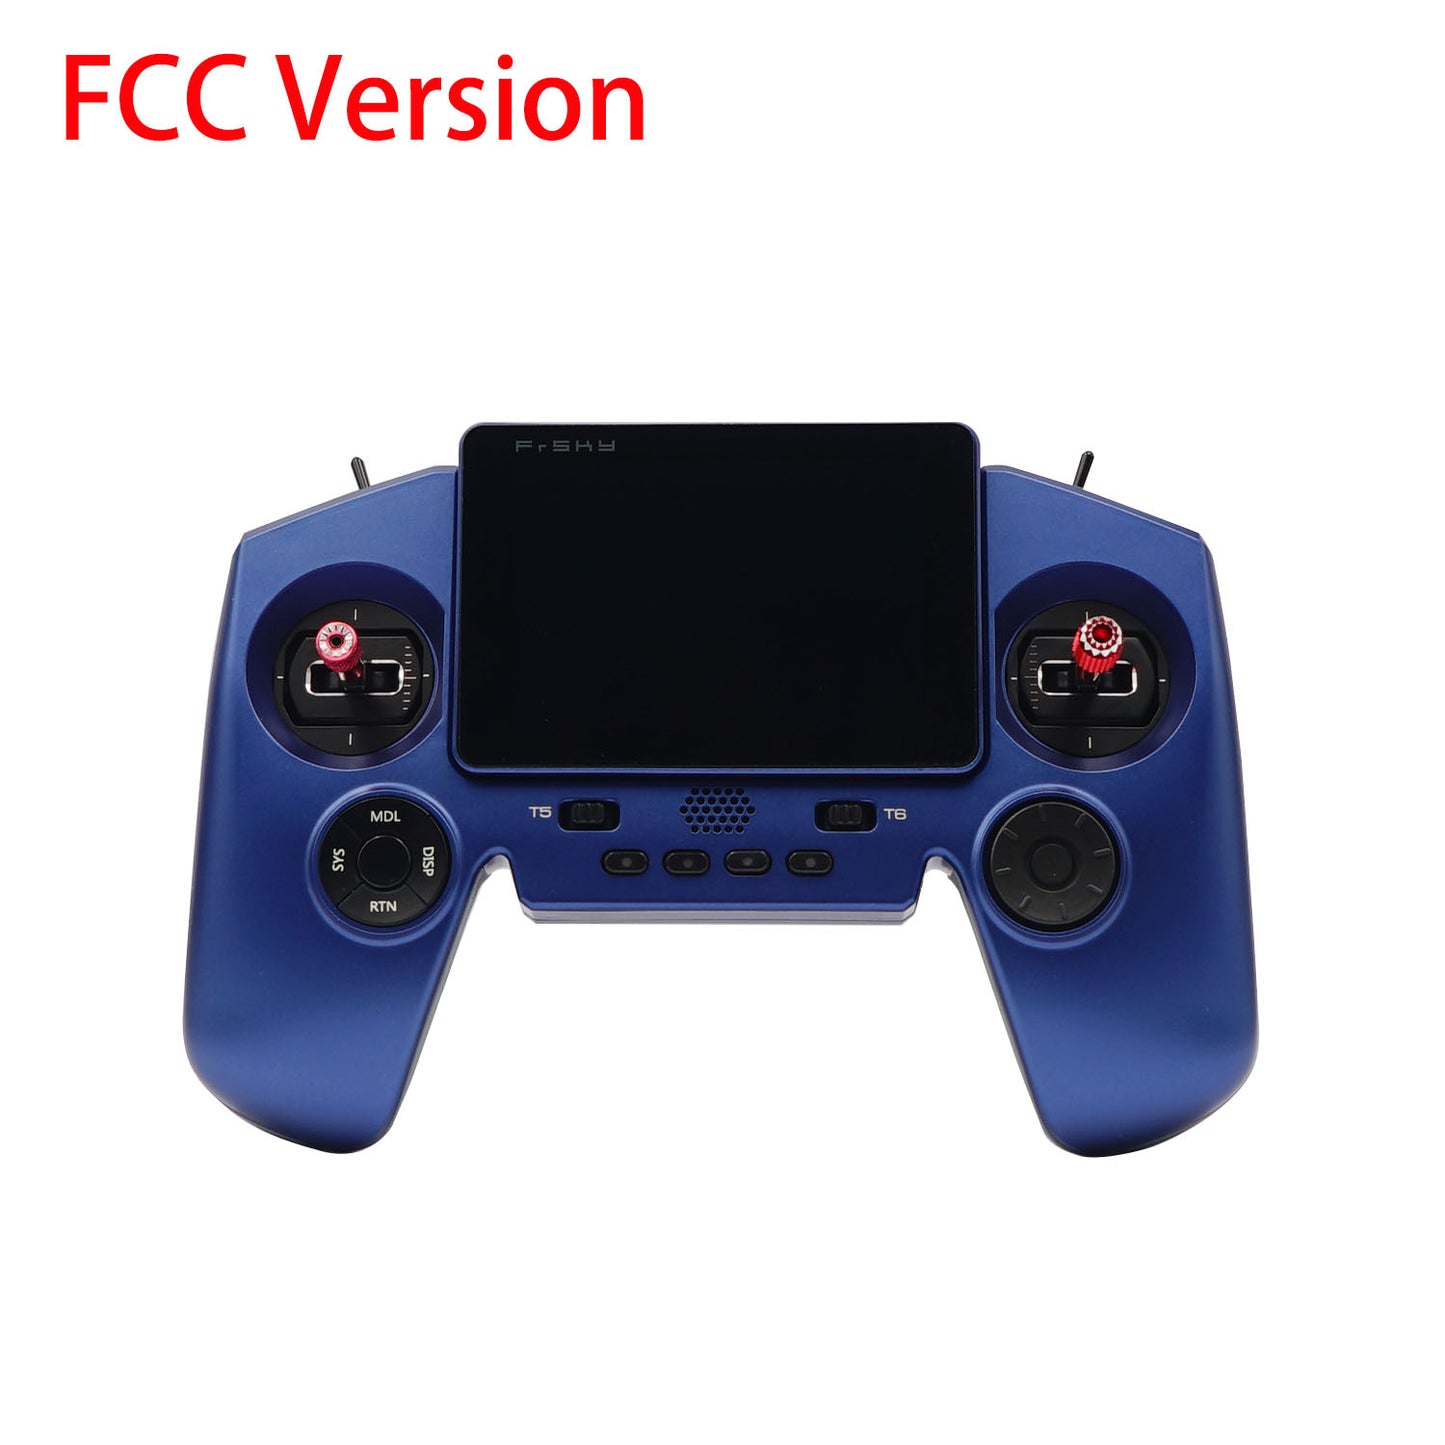 FrSky TWIN X Lite Transmitter ACCST D16 ACCESS TW Modes Built-in 128MB Flash Storage Remote Controller FCC 24 Channels